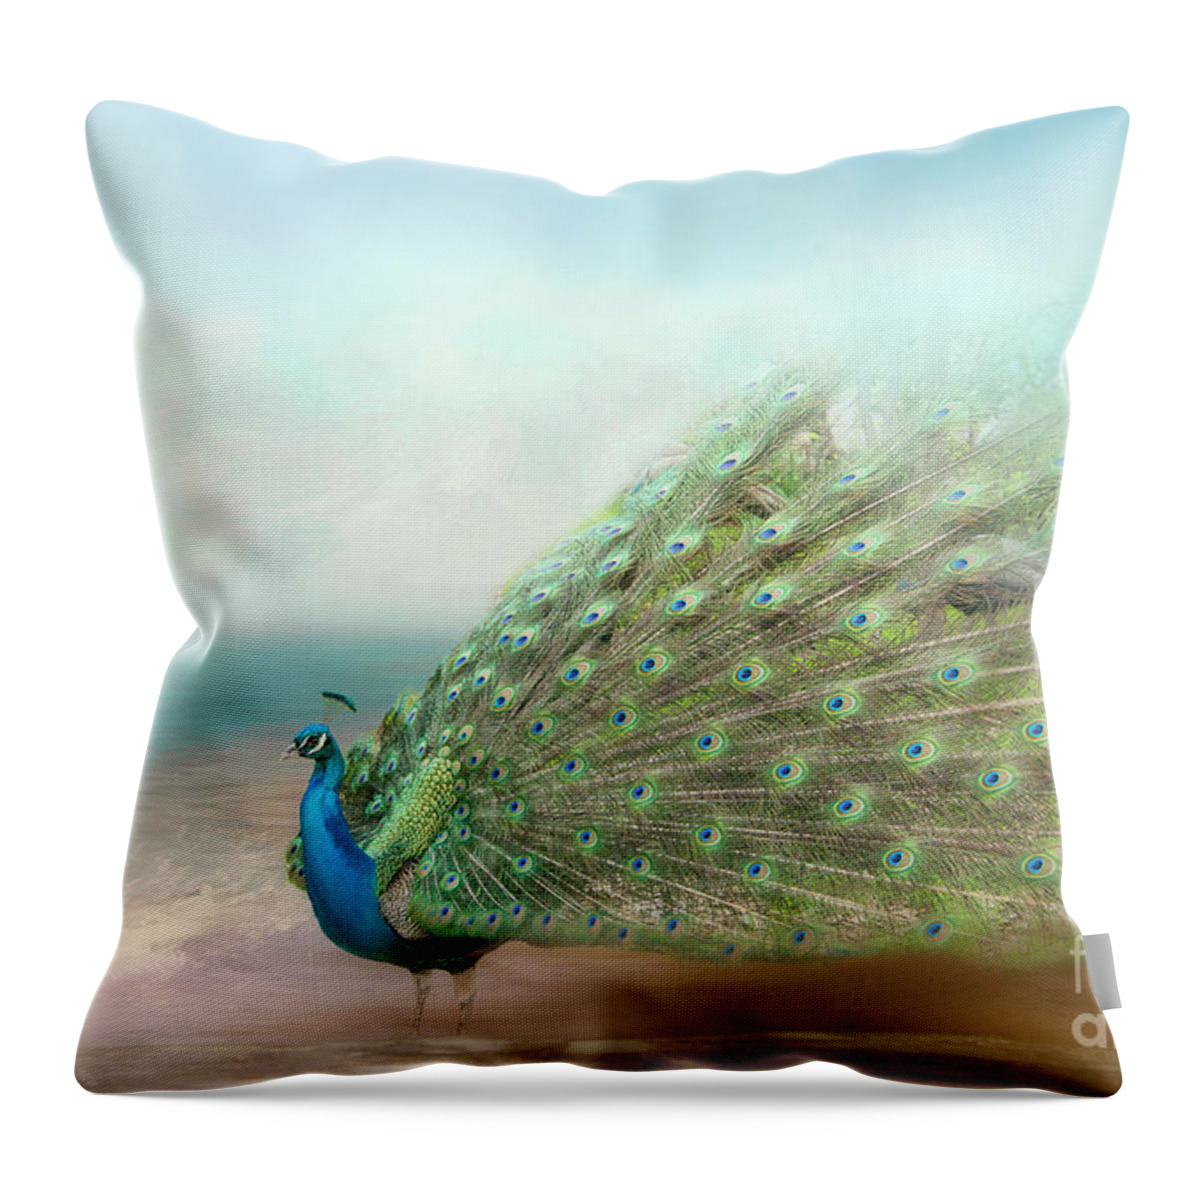 Peacock Throw Pillow featuring the photograph Peacock Beauty by Bonnie Barry